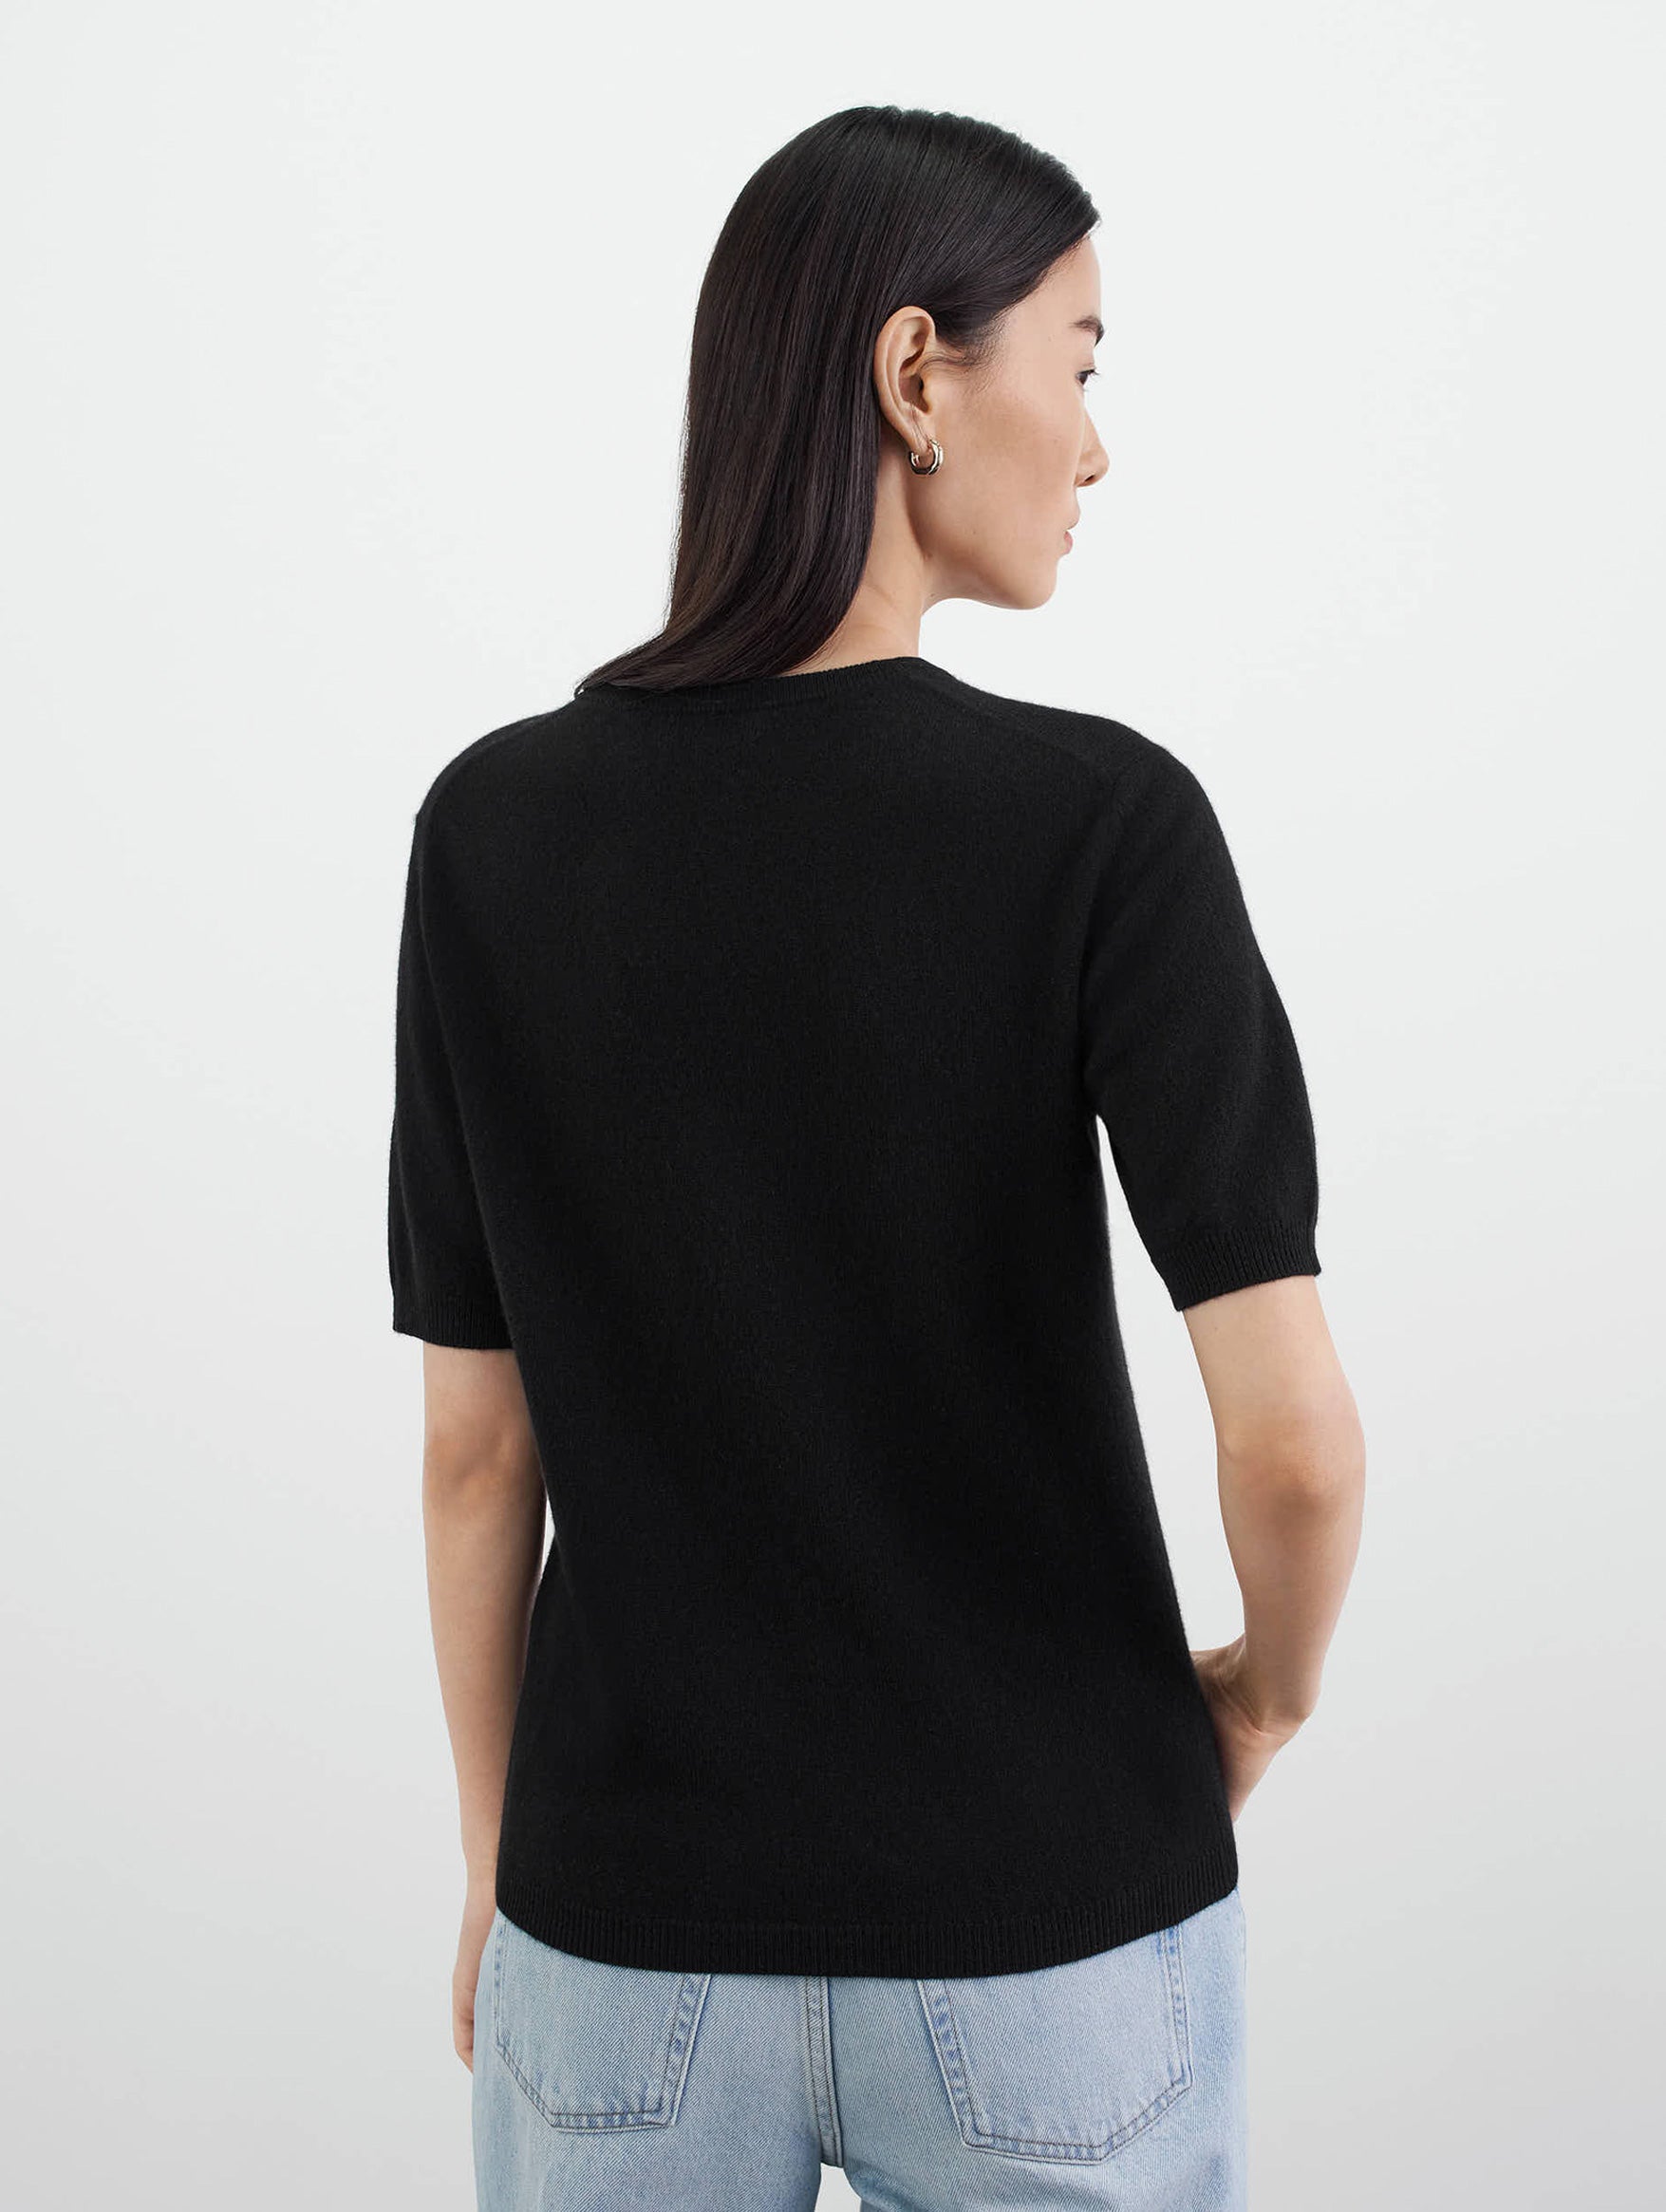 Short Sleeve O-Neck Cashmere Tee in Black